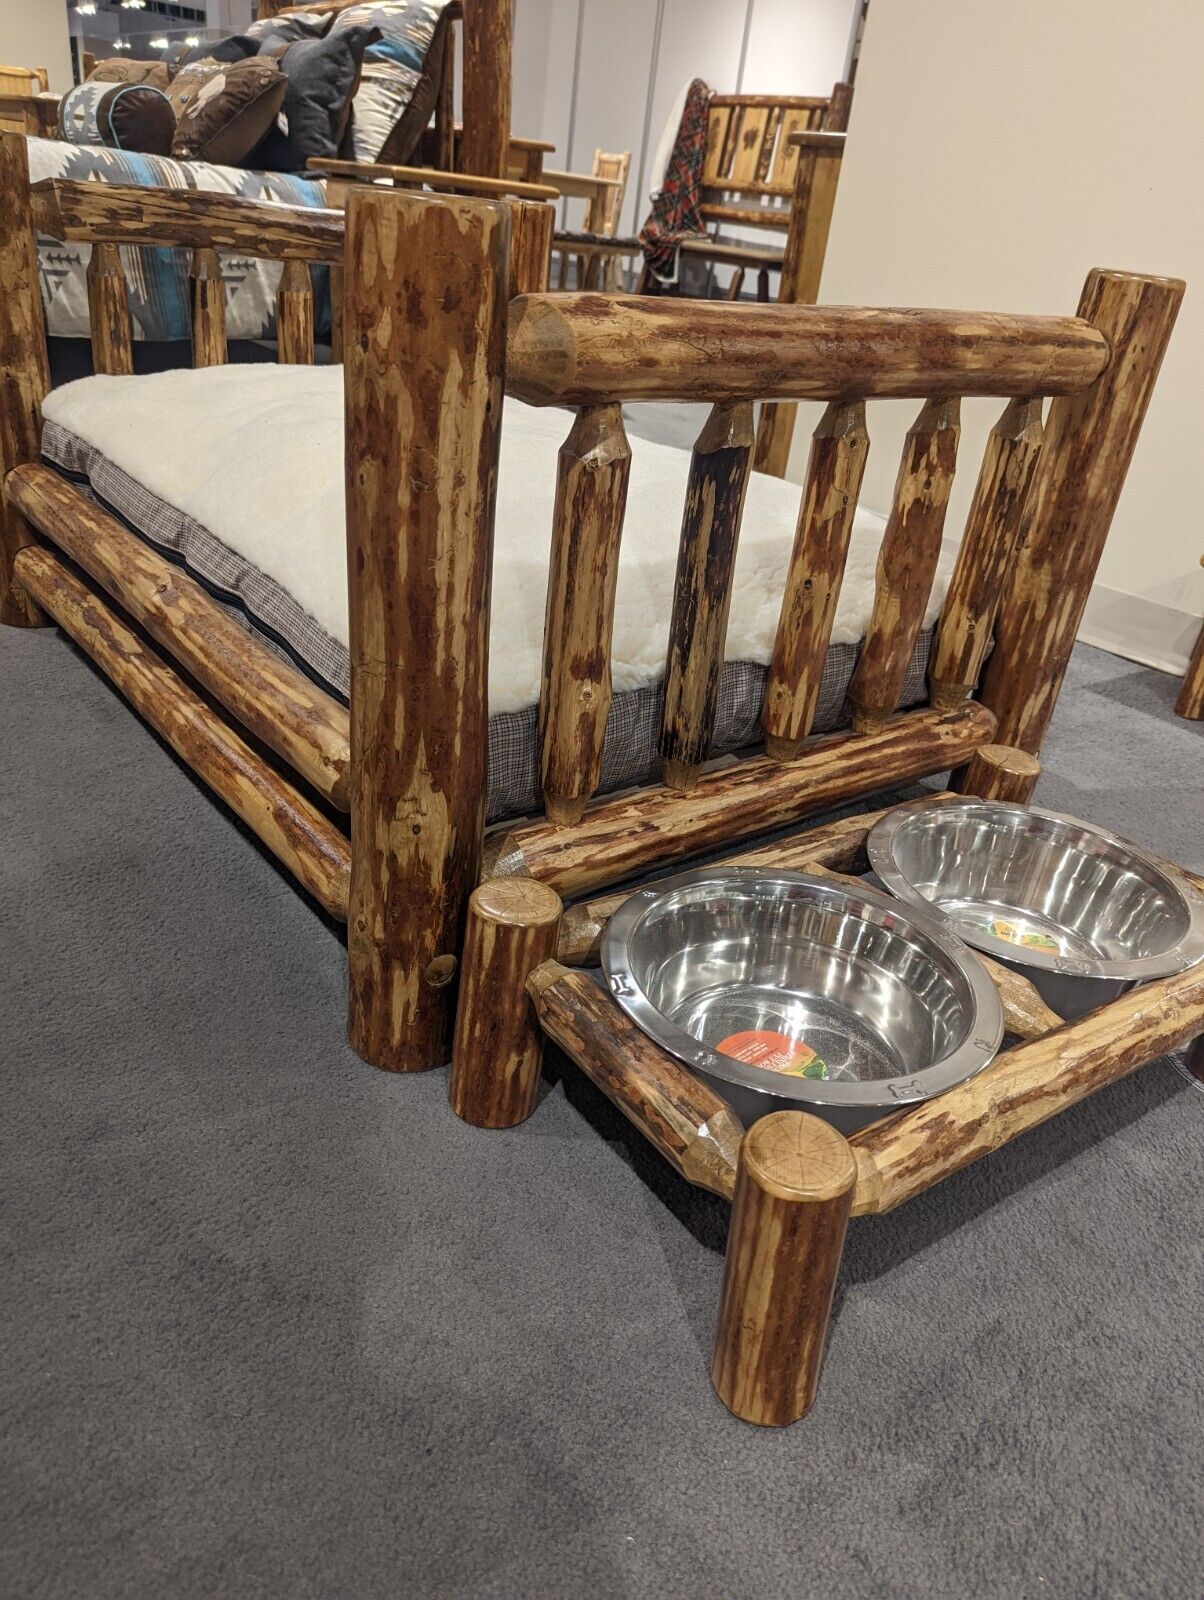 Rustic Raised DEG BED and Feeder SET for Larger Dogs LOG Cabin Style